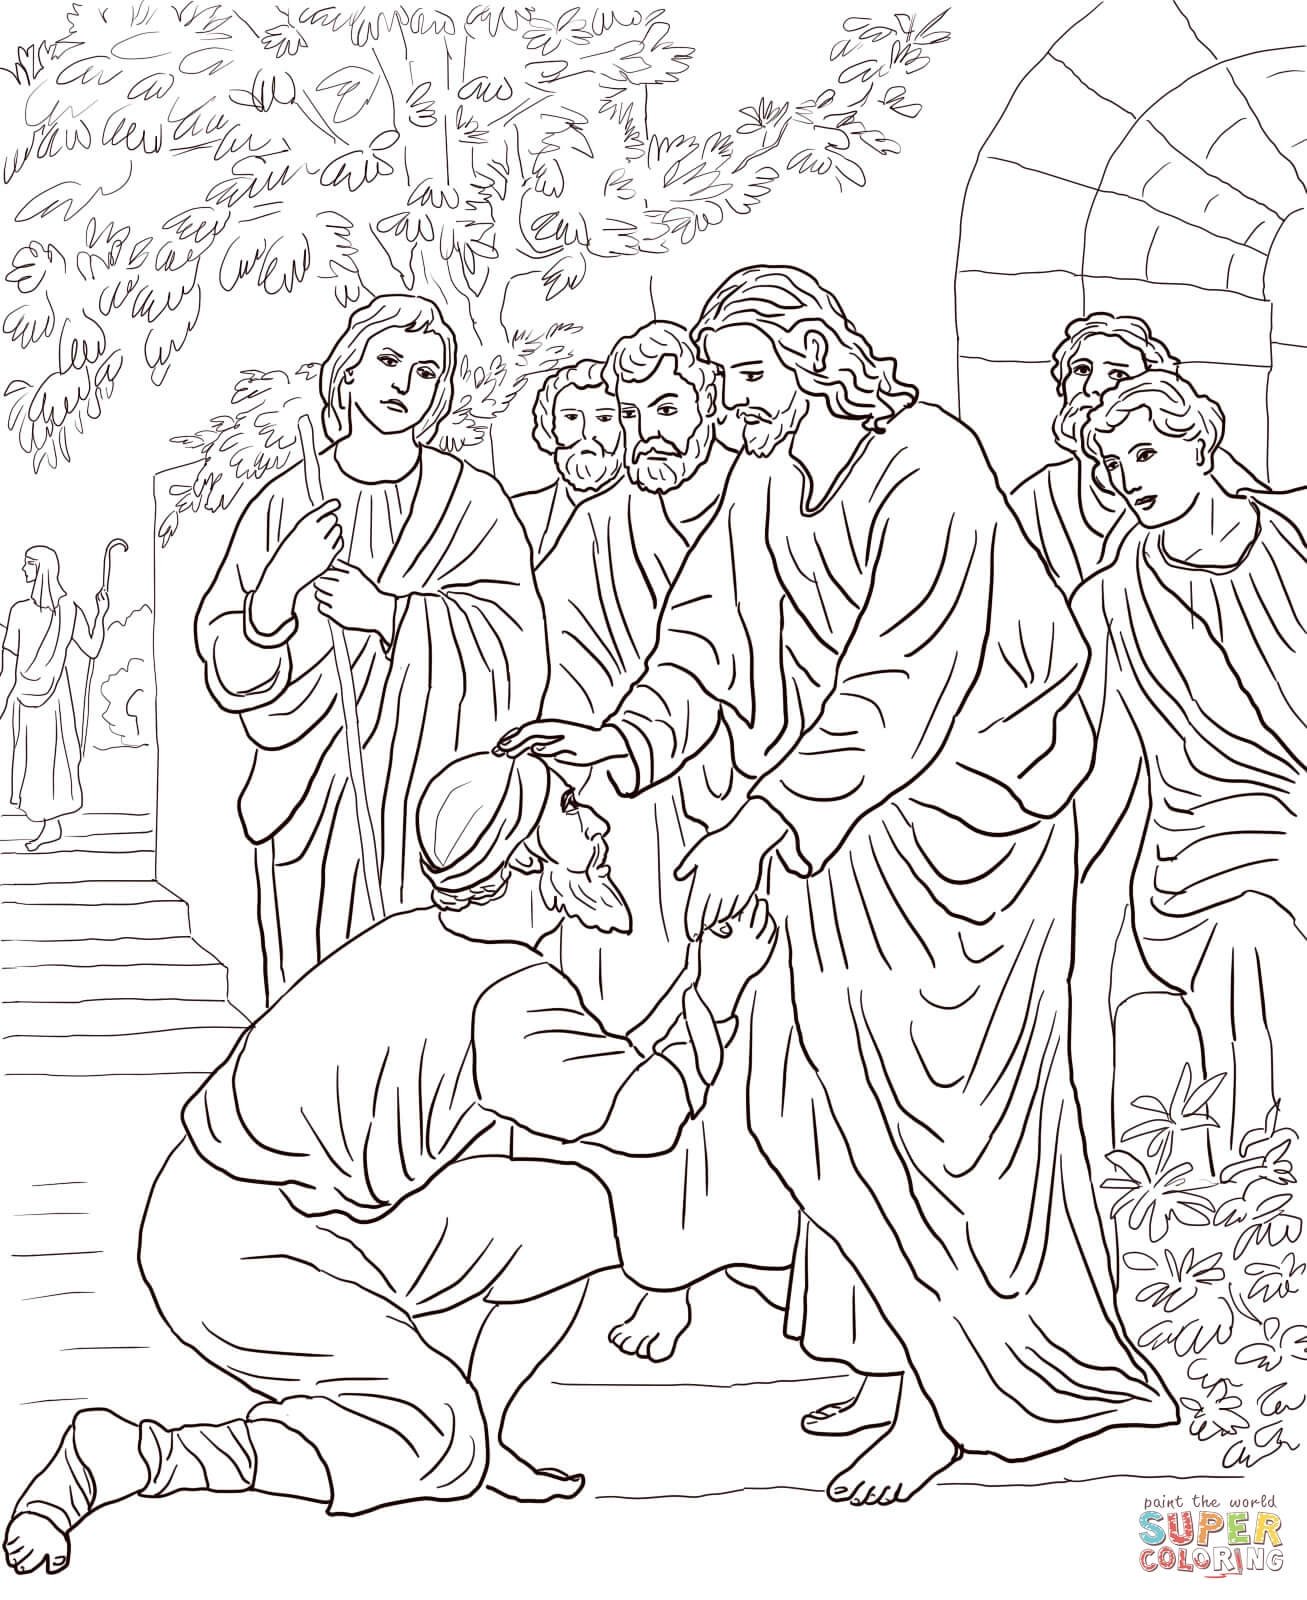 Coloring page majestic meeting of the Lord